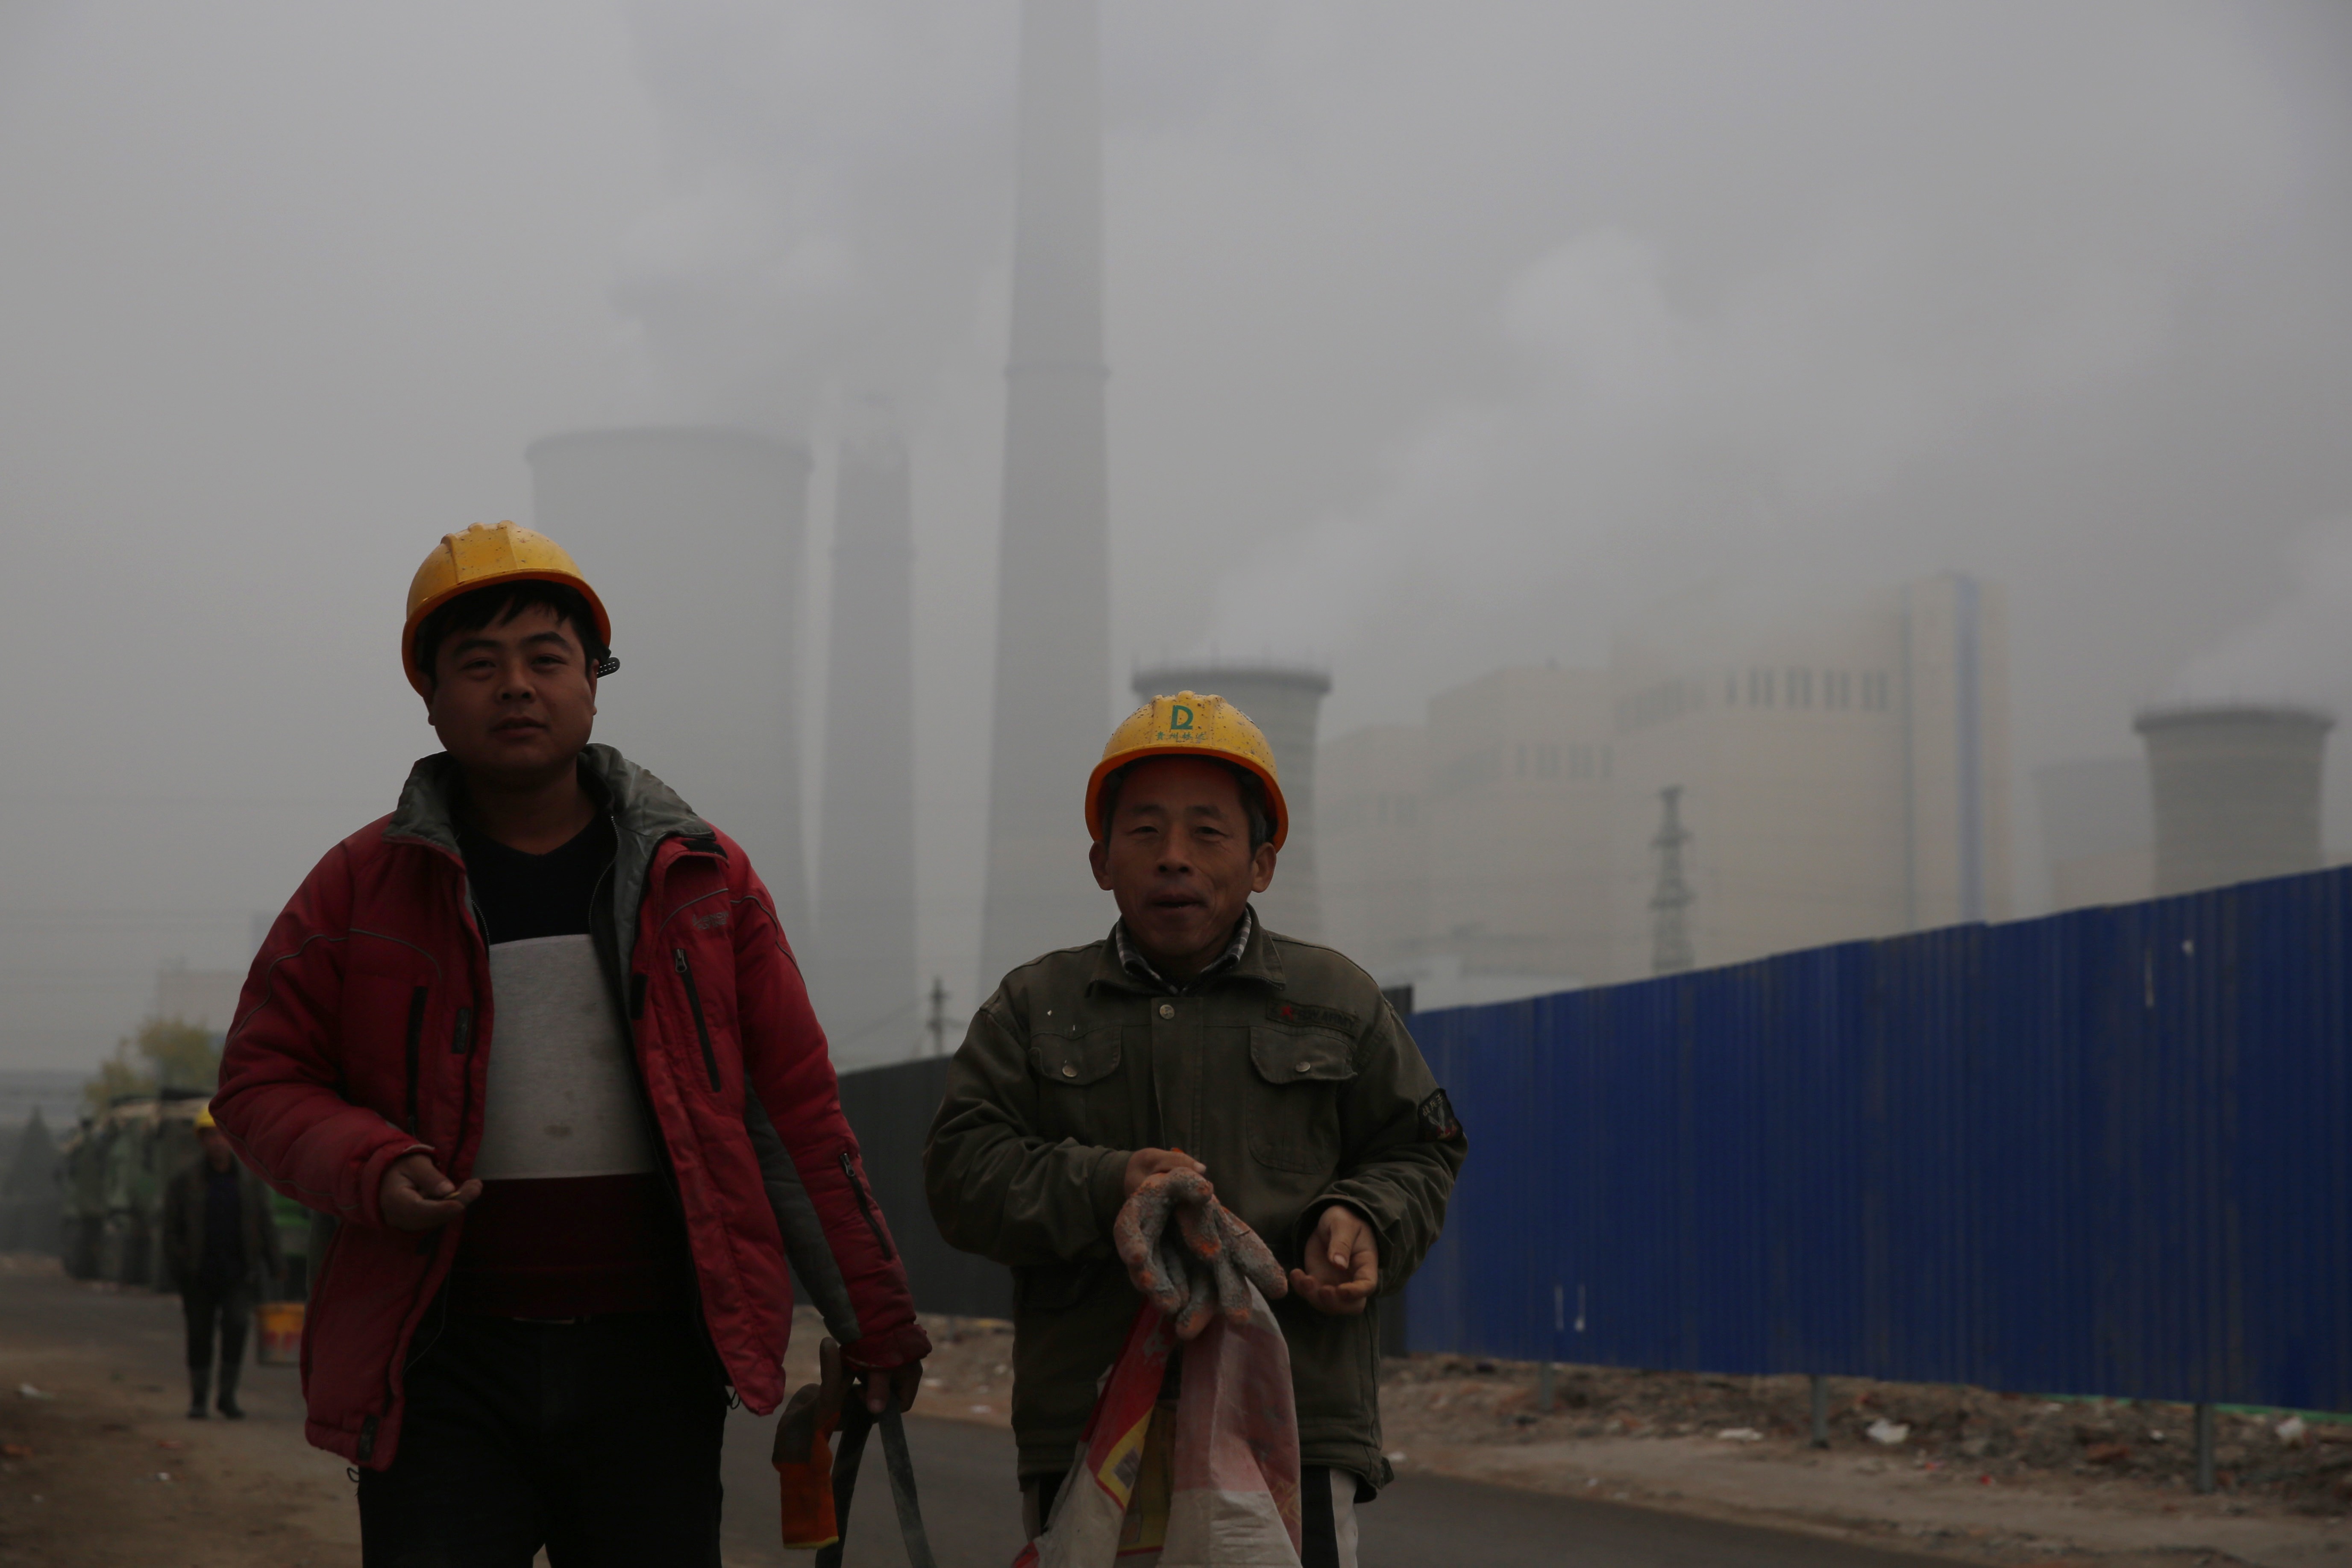 Workers walk near a power plant in Beijing during an especially polluted day in December 2018. China is the top emitter of carbon gases, but has had some success in capping emissions, particularly since 2013. Photo: EPA-EFE